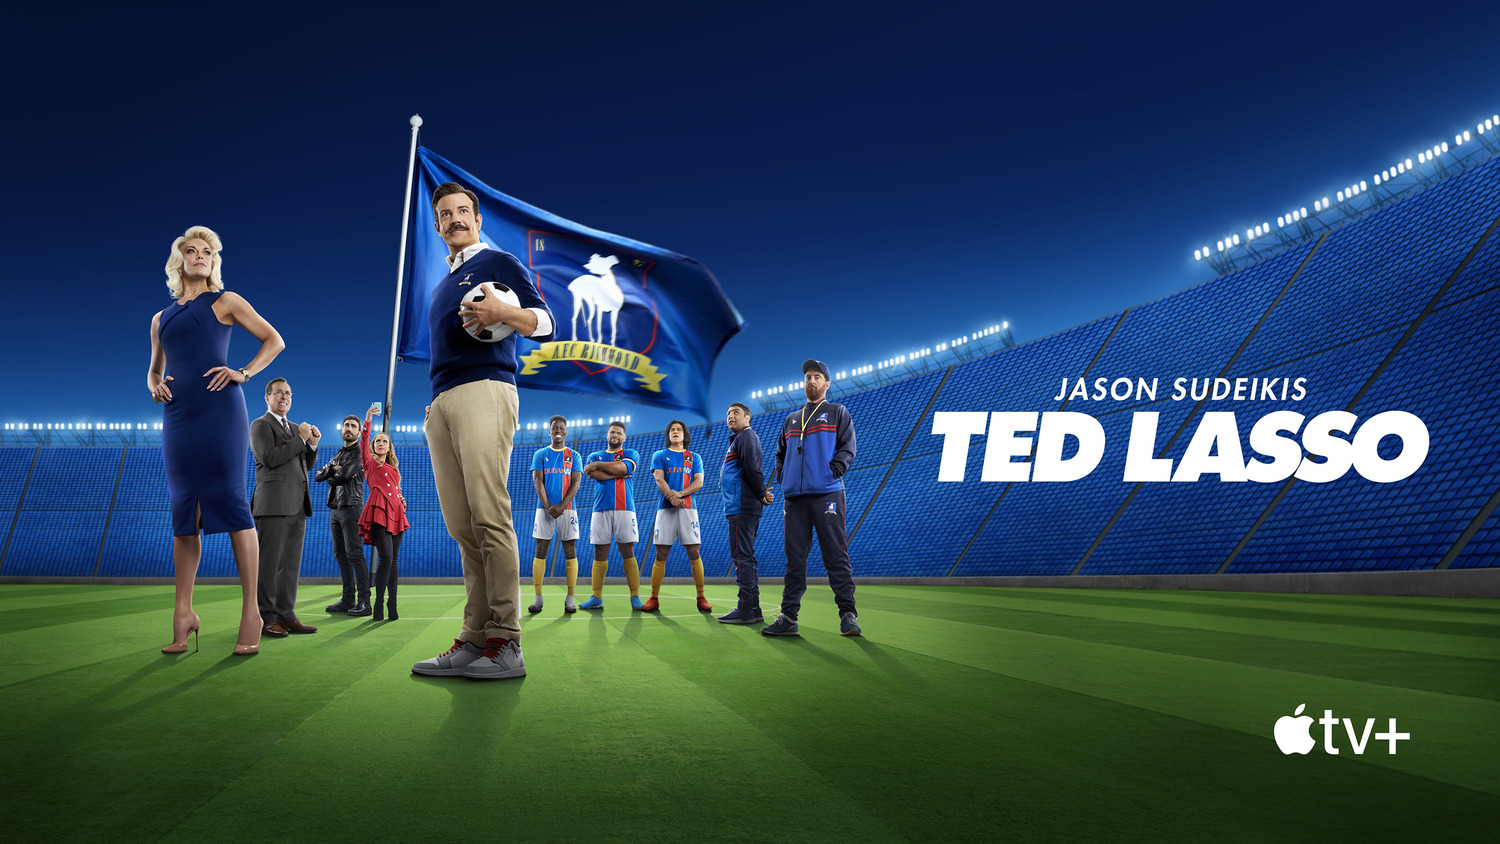 Extra Large TV Poster Image for Ted Lasso (#4 of 6)